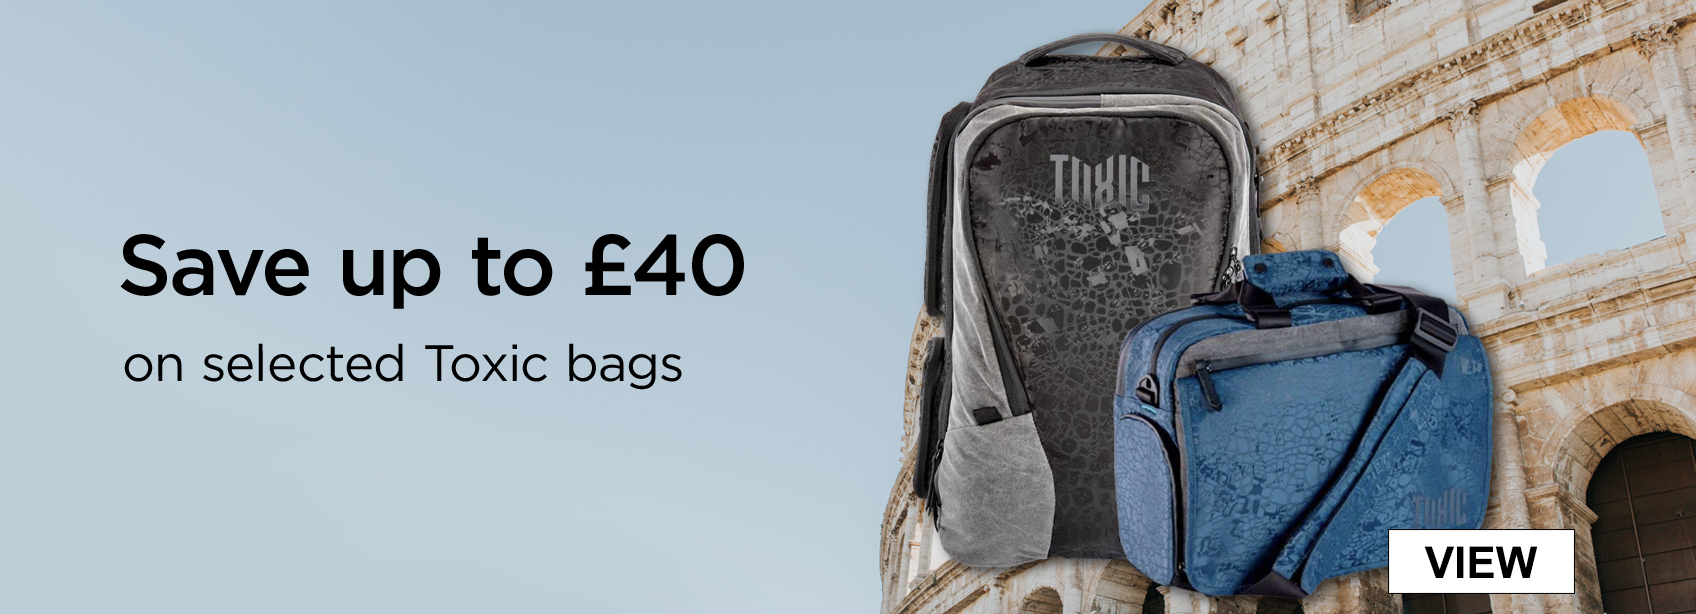 Save up to £40 on selected Toxic bags